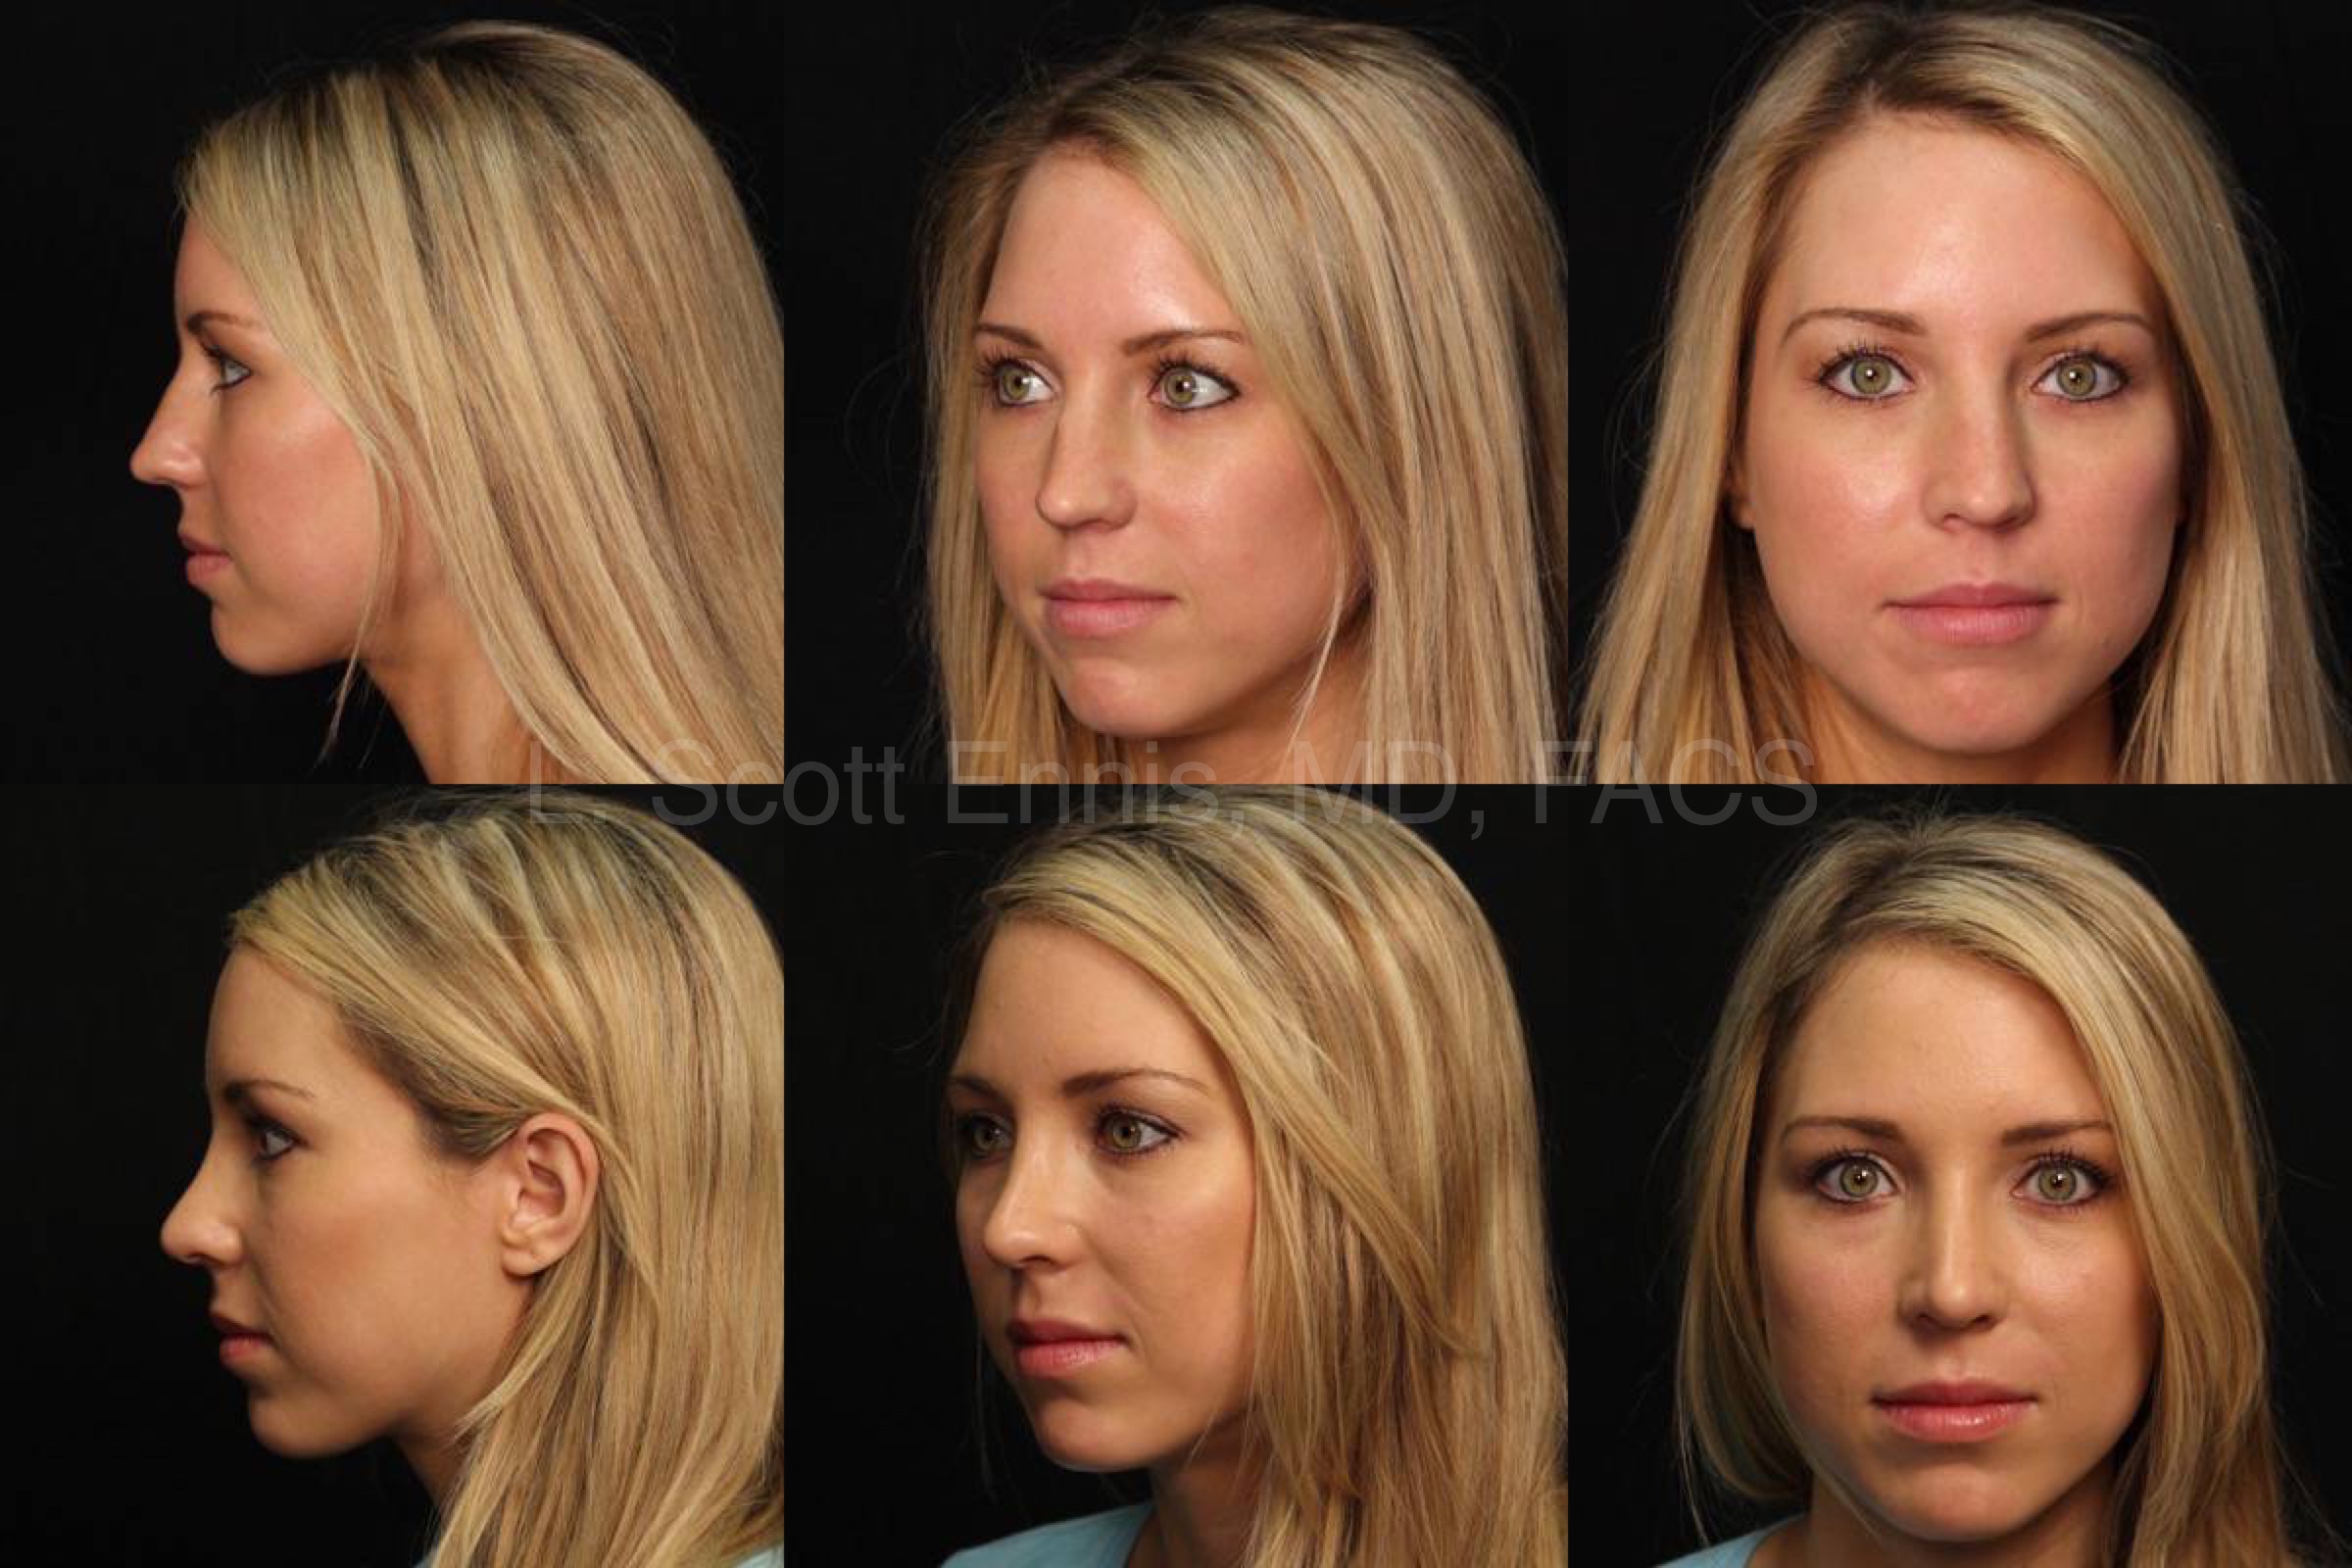 Rhinoplasty - correction of crooked nose Before and After Ennis Plastic Surgery Fort Lauderdale -Palm Beach Boca Raton Destin Miami 27198